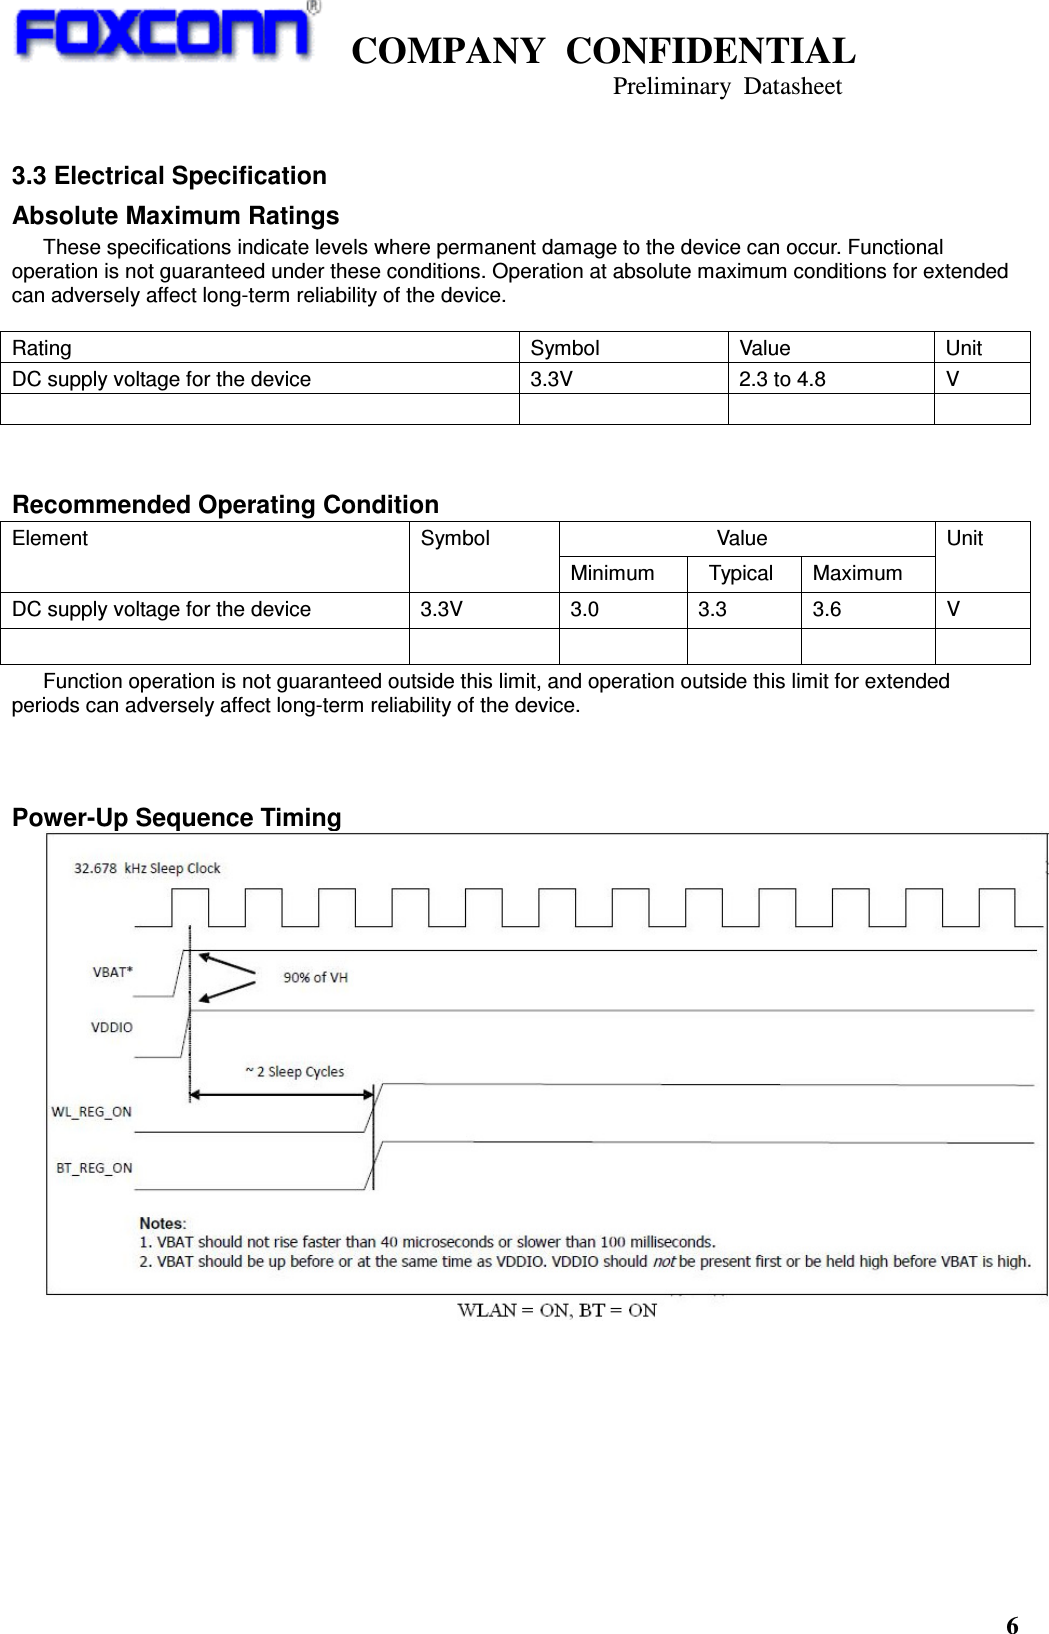    COMPANY  CONFIDENTIAL                                                                     Preliminary  Datasheet 6   3.3 Electrical Specification Absolute Maximum Ratings These specifications indicate levels where permanent damage to the device can occur. Functional operation is not guaranteed under these conditions. Operation at absolute maximum conditions for extended can adversely affect long-term reliability of the device.   Recommended Operating Condition                             Value Element  Symbol Minimum    Typical  Maximum Unit DC supply voltage for the device  3.3V  3.0  3.3  3.6  V            Function operation is not guaranteed outside this limit, and operation outside this limit for extended periods can adversely affect long-term reliability of the device.    Power-Up Sequence Timing            Rating  Symbol  Value  Unit DC supply voltage for the device  3.3V  2.3 to 4.8  V        